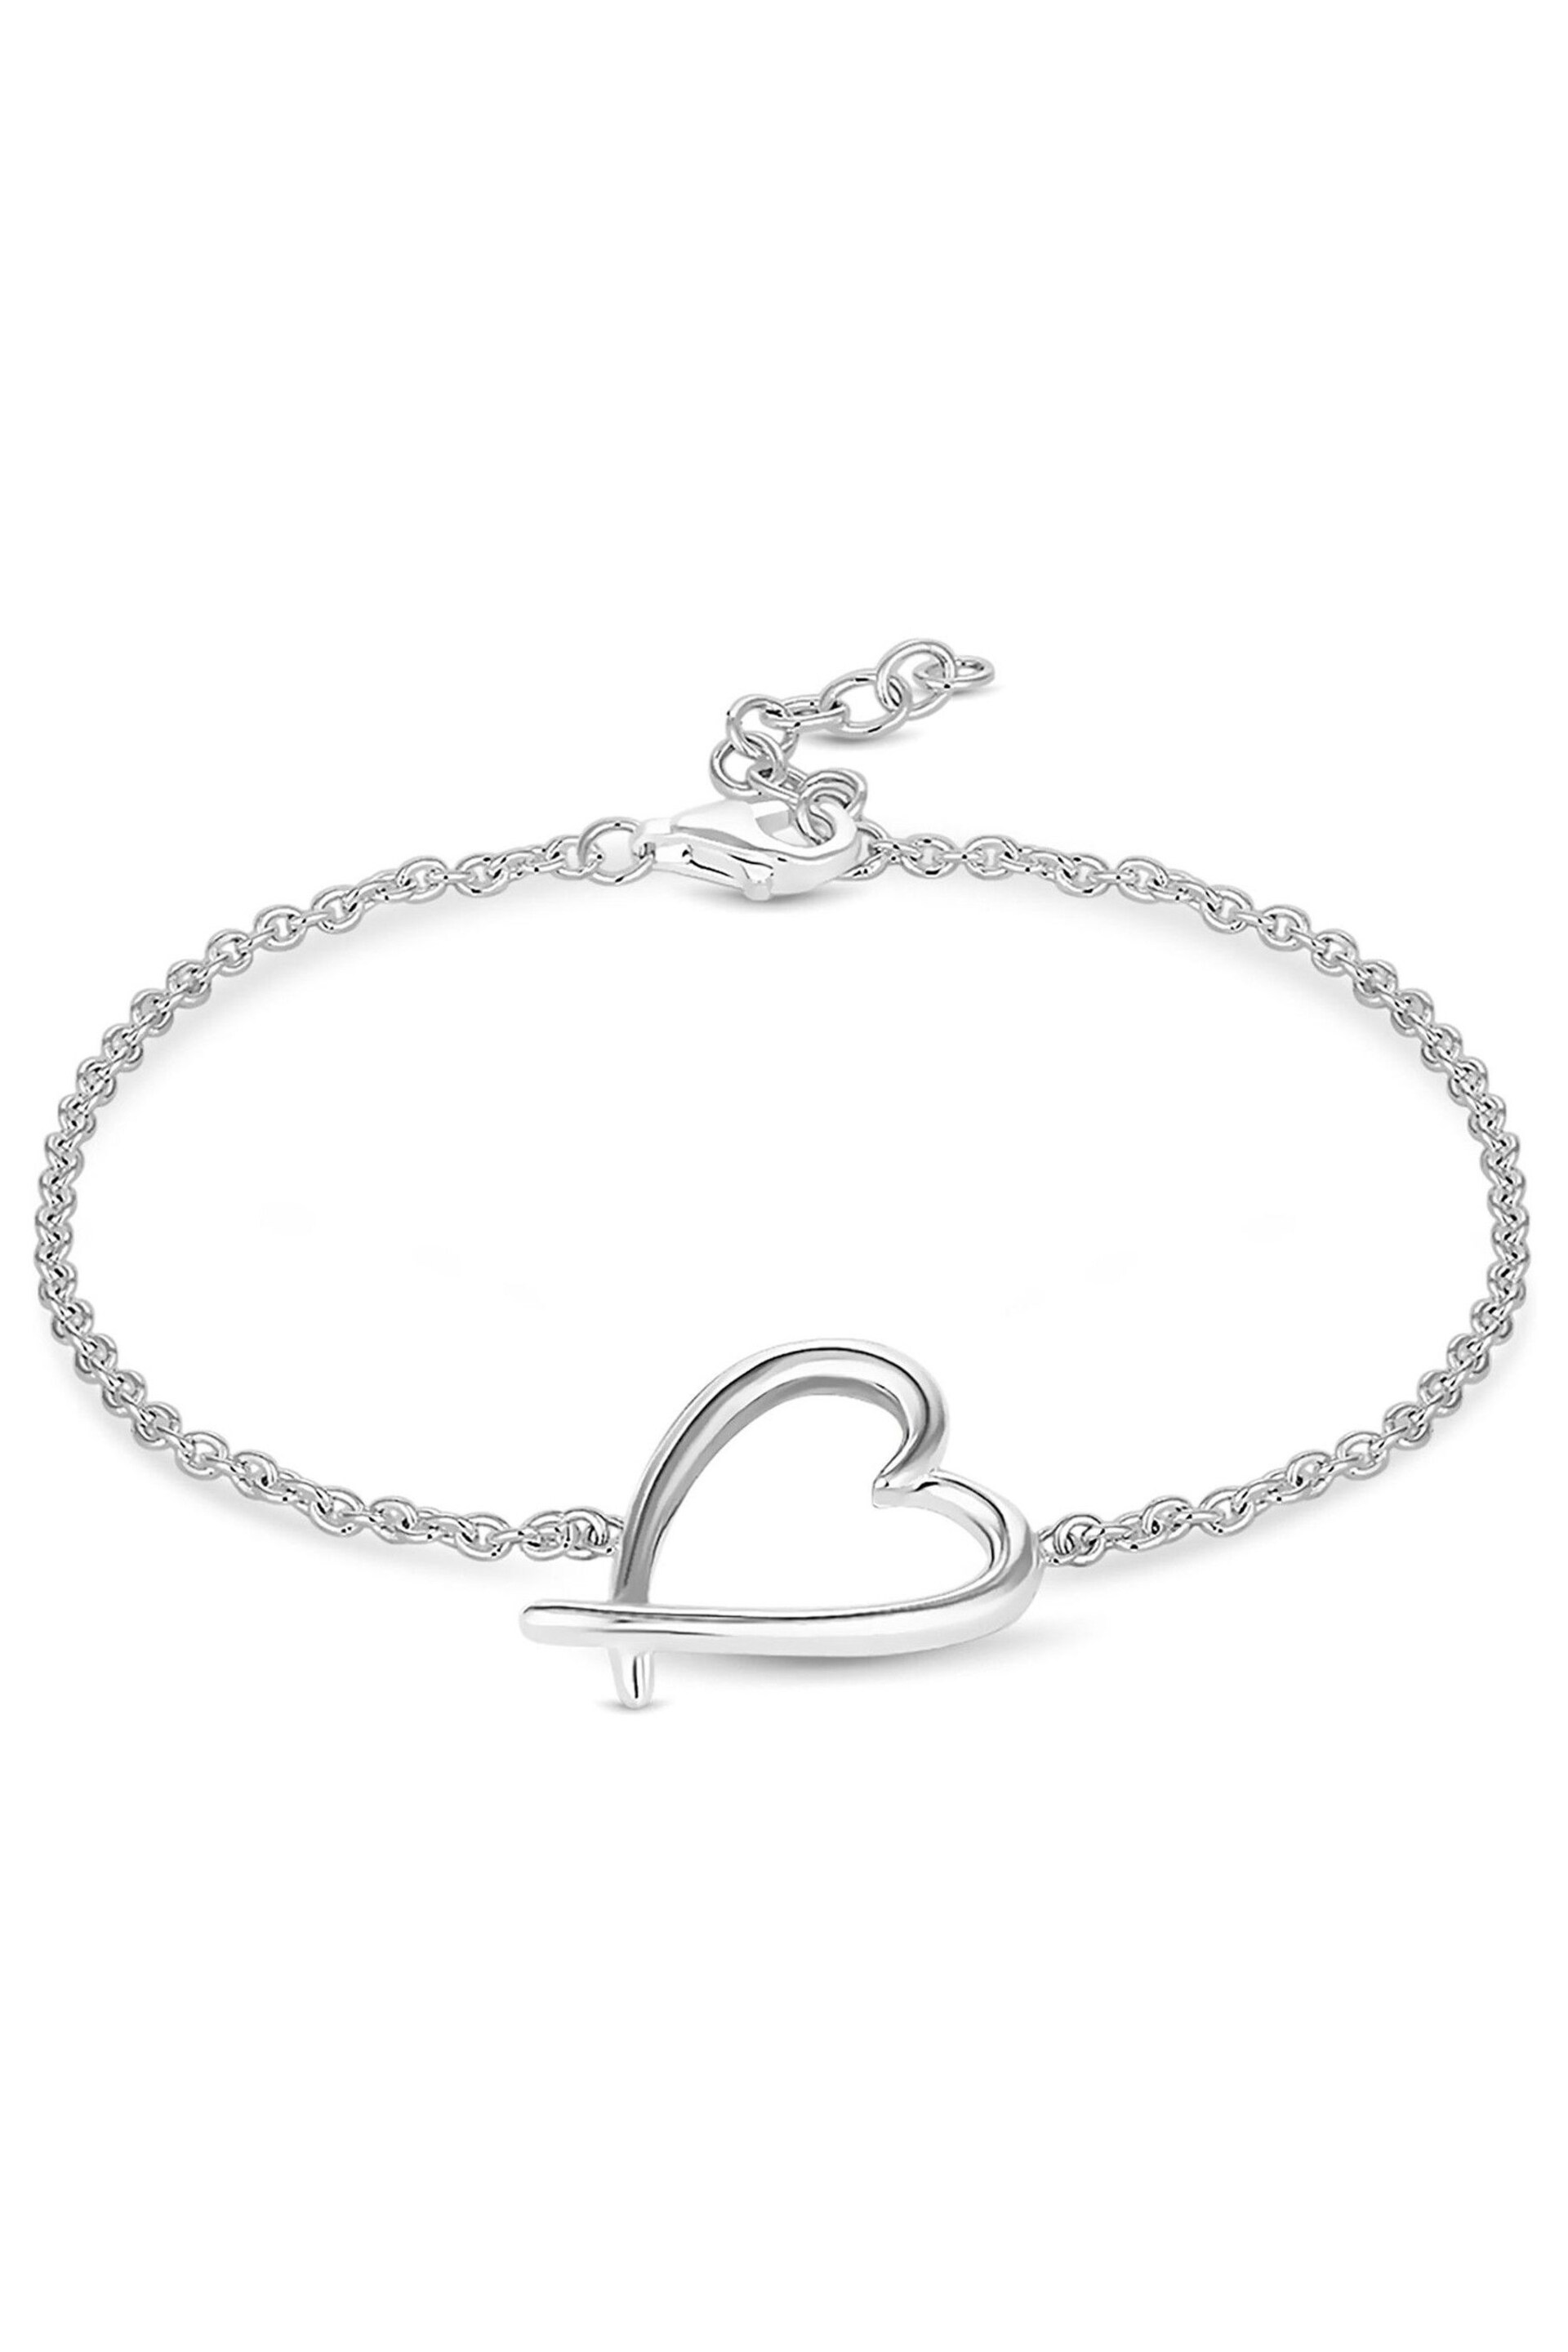 Simply Silver Sterling Silver Tone 925 Polished Open Heart Bracelet - Image 1 of 4